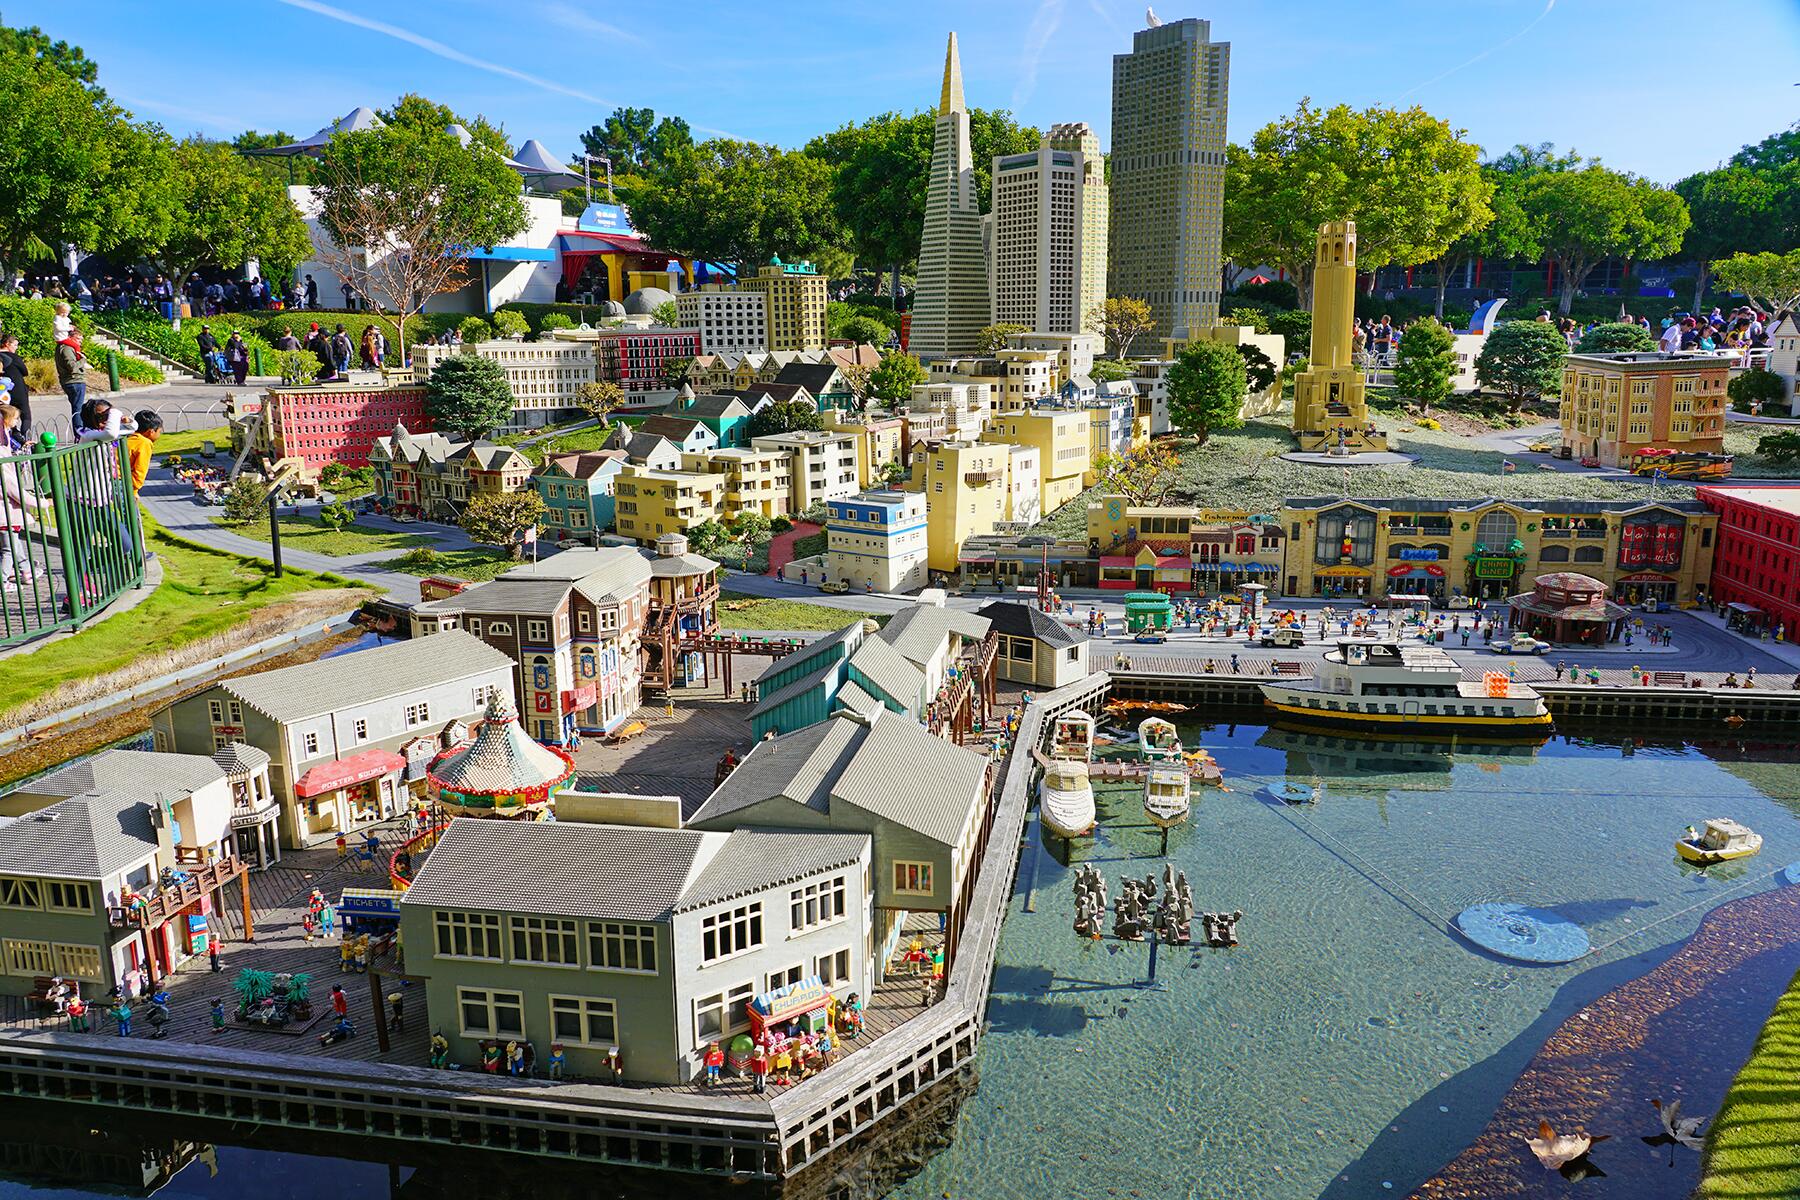 <a href='https://www.fodors.com/world/north-america/usa/california/experiences/news/photos/the-best-fall-day-trips-to-take-from-los-angeles#'>From &quot;12 Easy Fall Day Trips to Take From Los Angeles: Legoland&quot;</a>